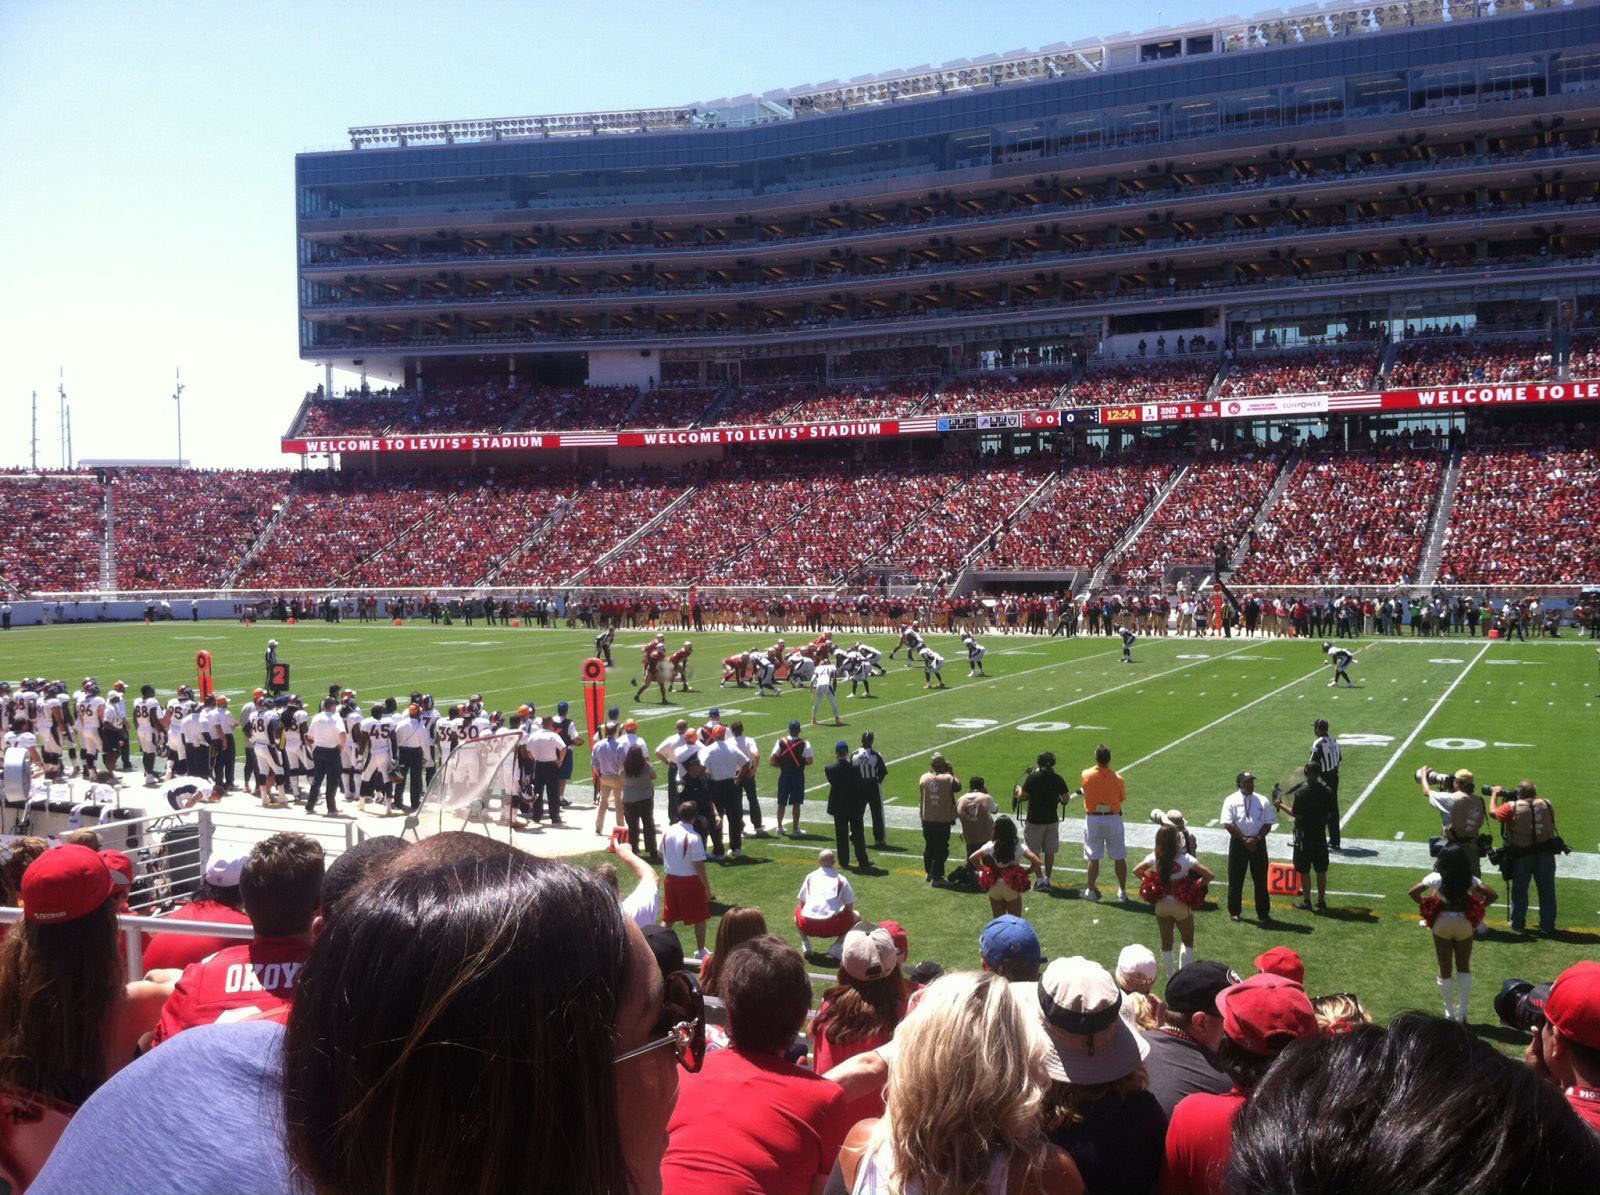 section 111, row 9 seat view  - levi